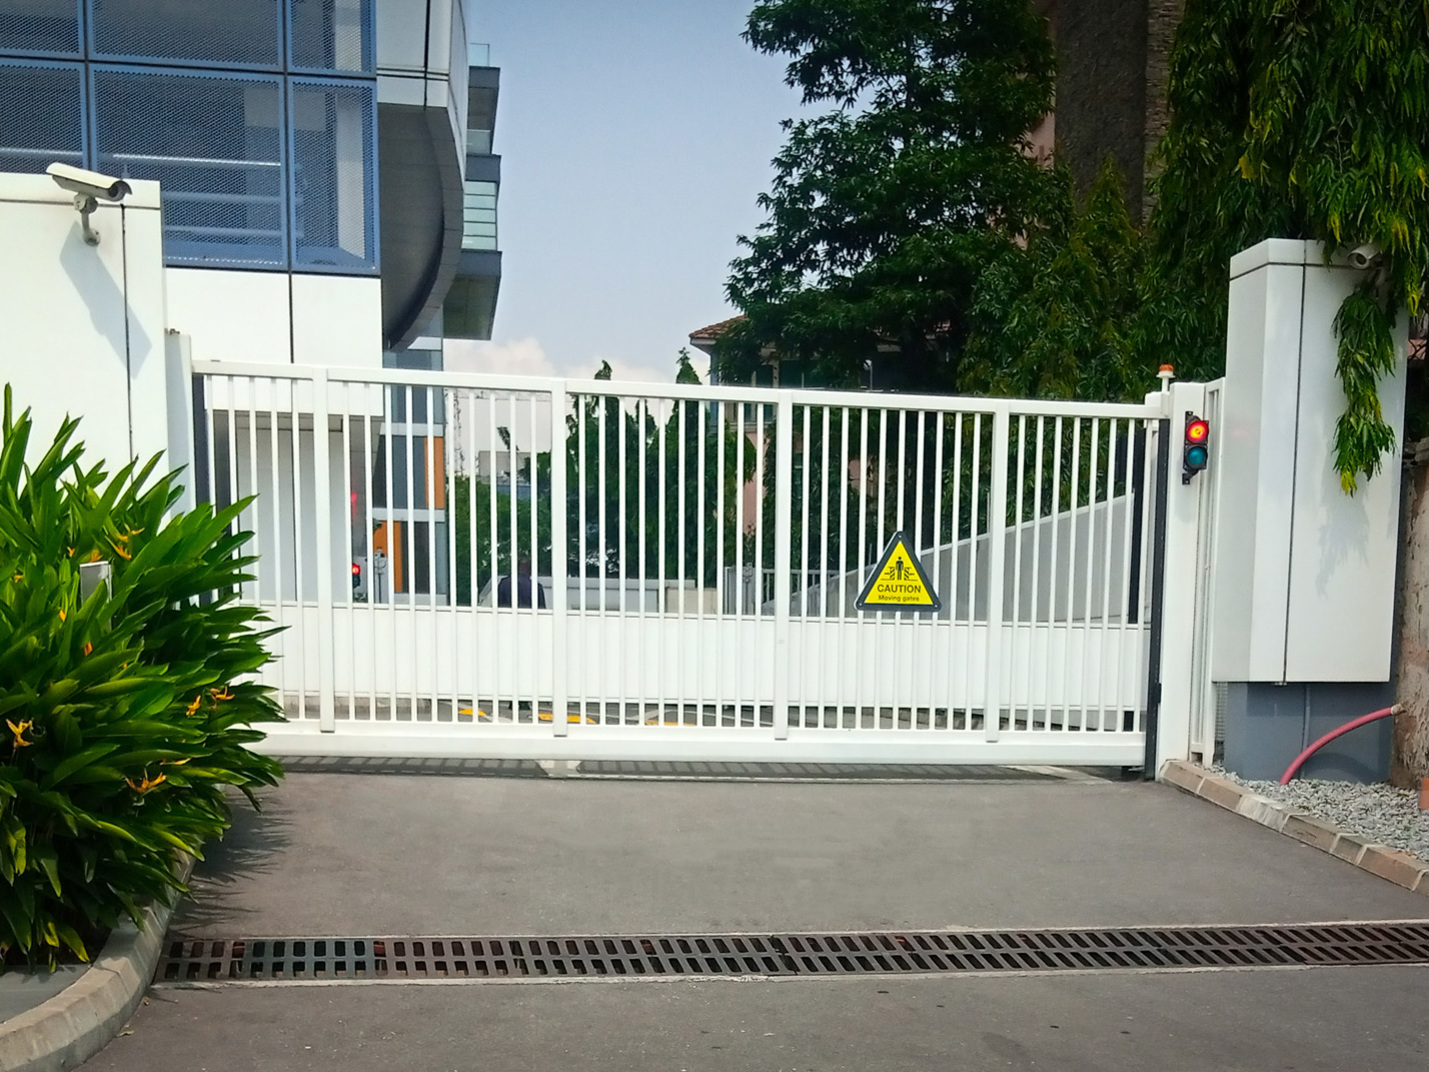 CSG 10140 - Product shown is not as RATED & gate includes additional mesh not affixed at the crash test. Image is during factory test at Cova Security Gates.